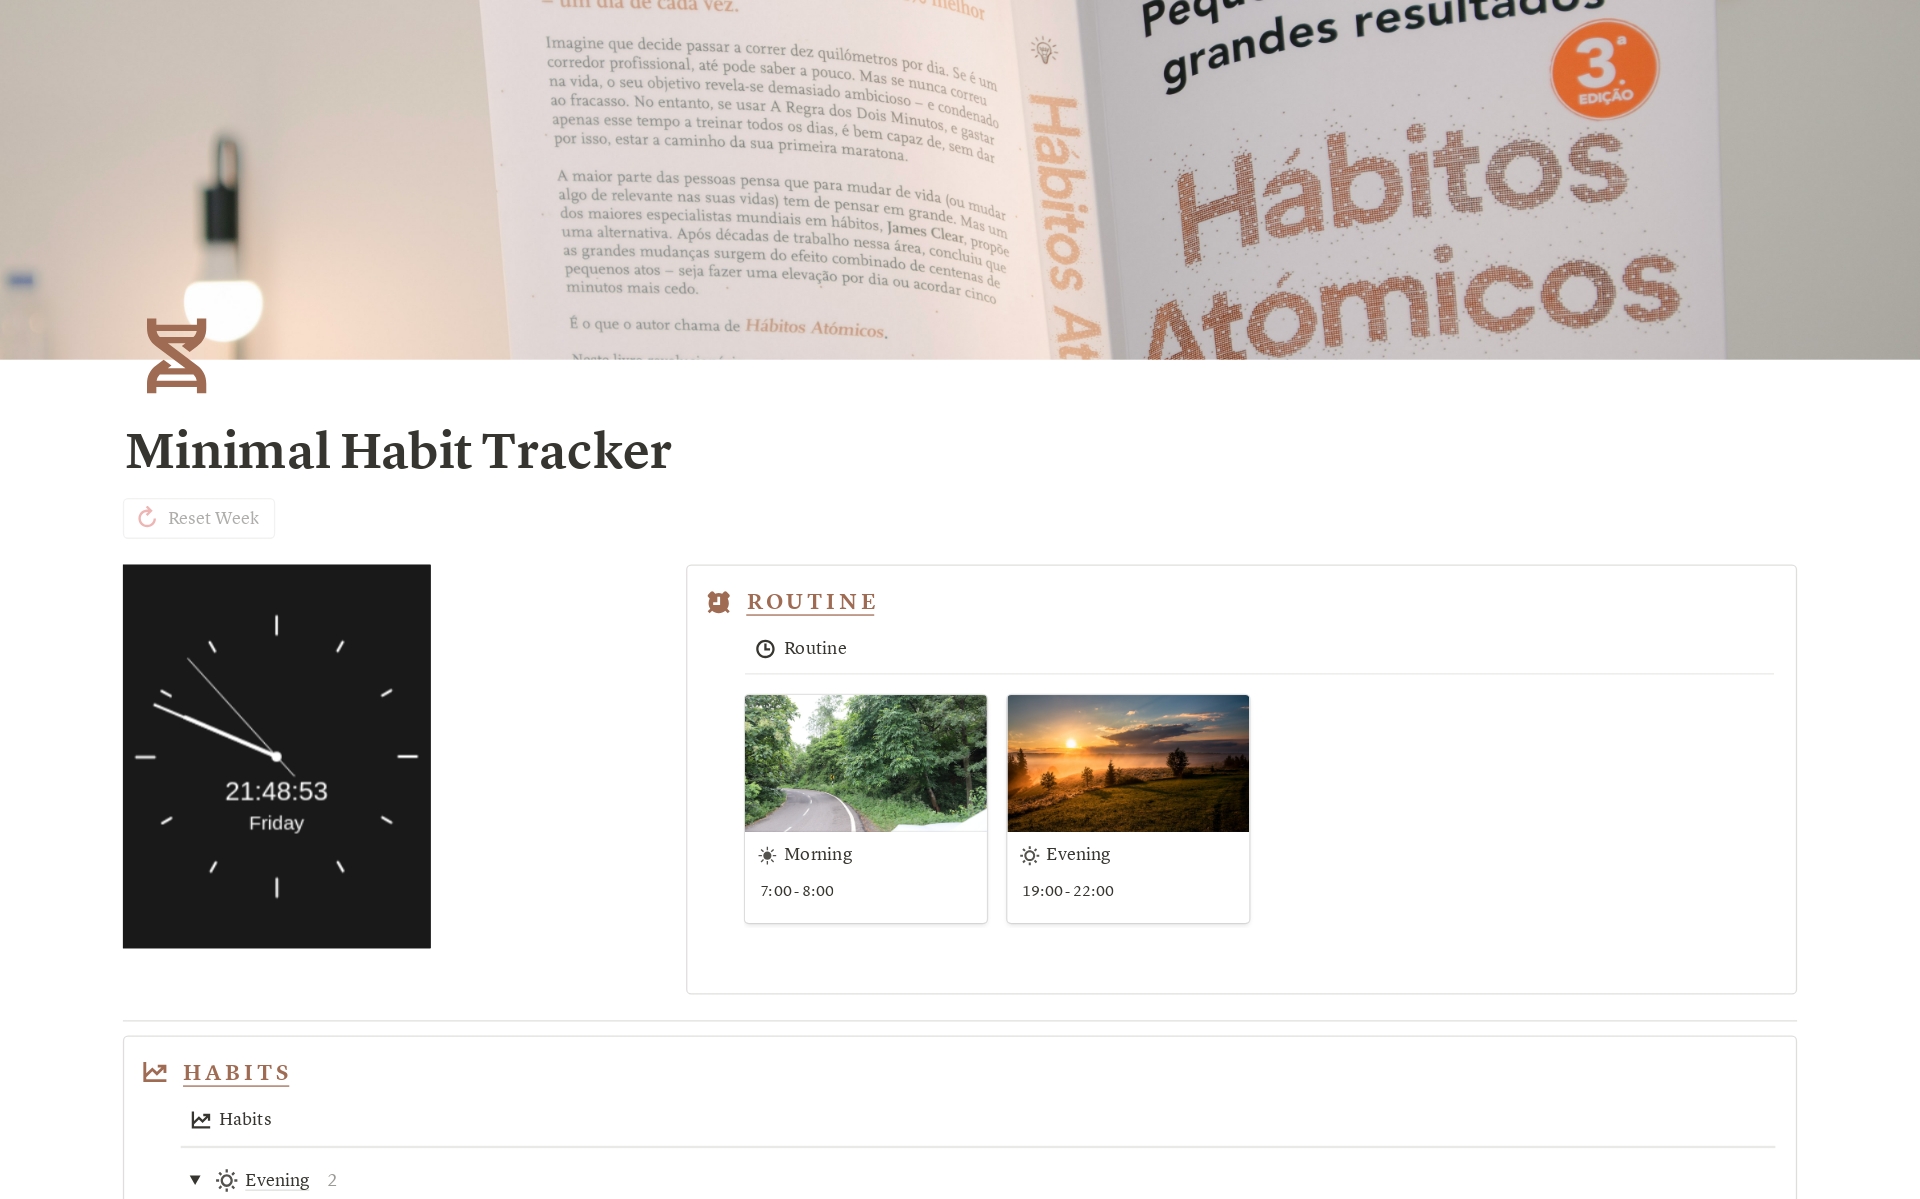 Transform your personal goals and hobbies with an effective habit tracker. Monitor daily routines, stay motivated, and achieve your ambitions with ease. Start building positive habits and enjoy a more productive, fulfilling life by tracking your progress consistently.